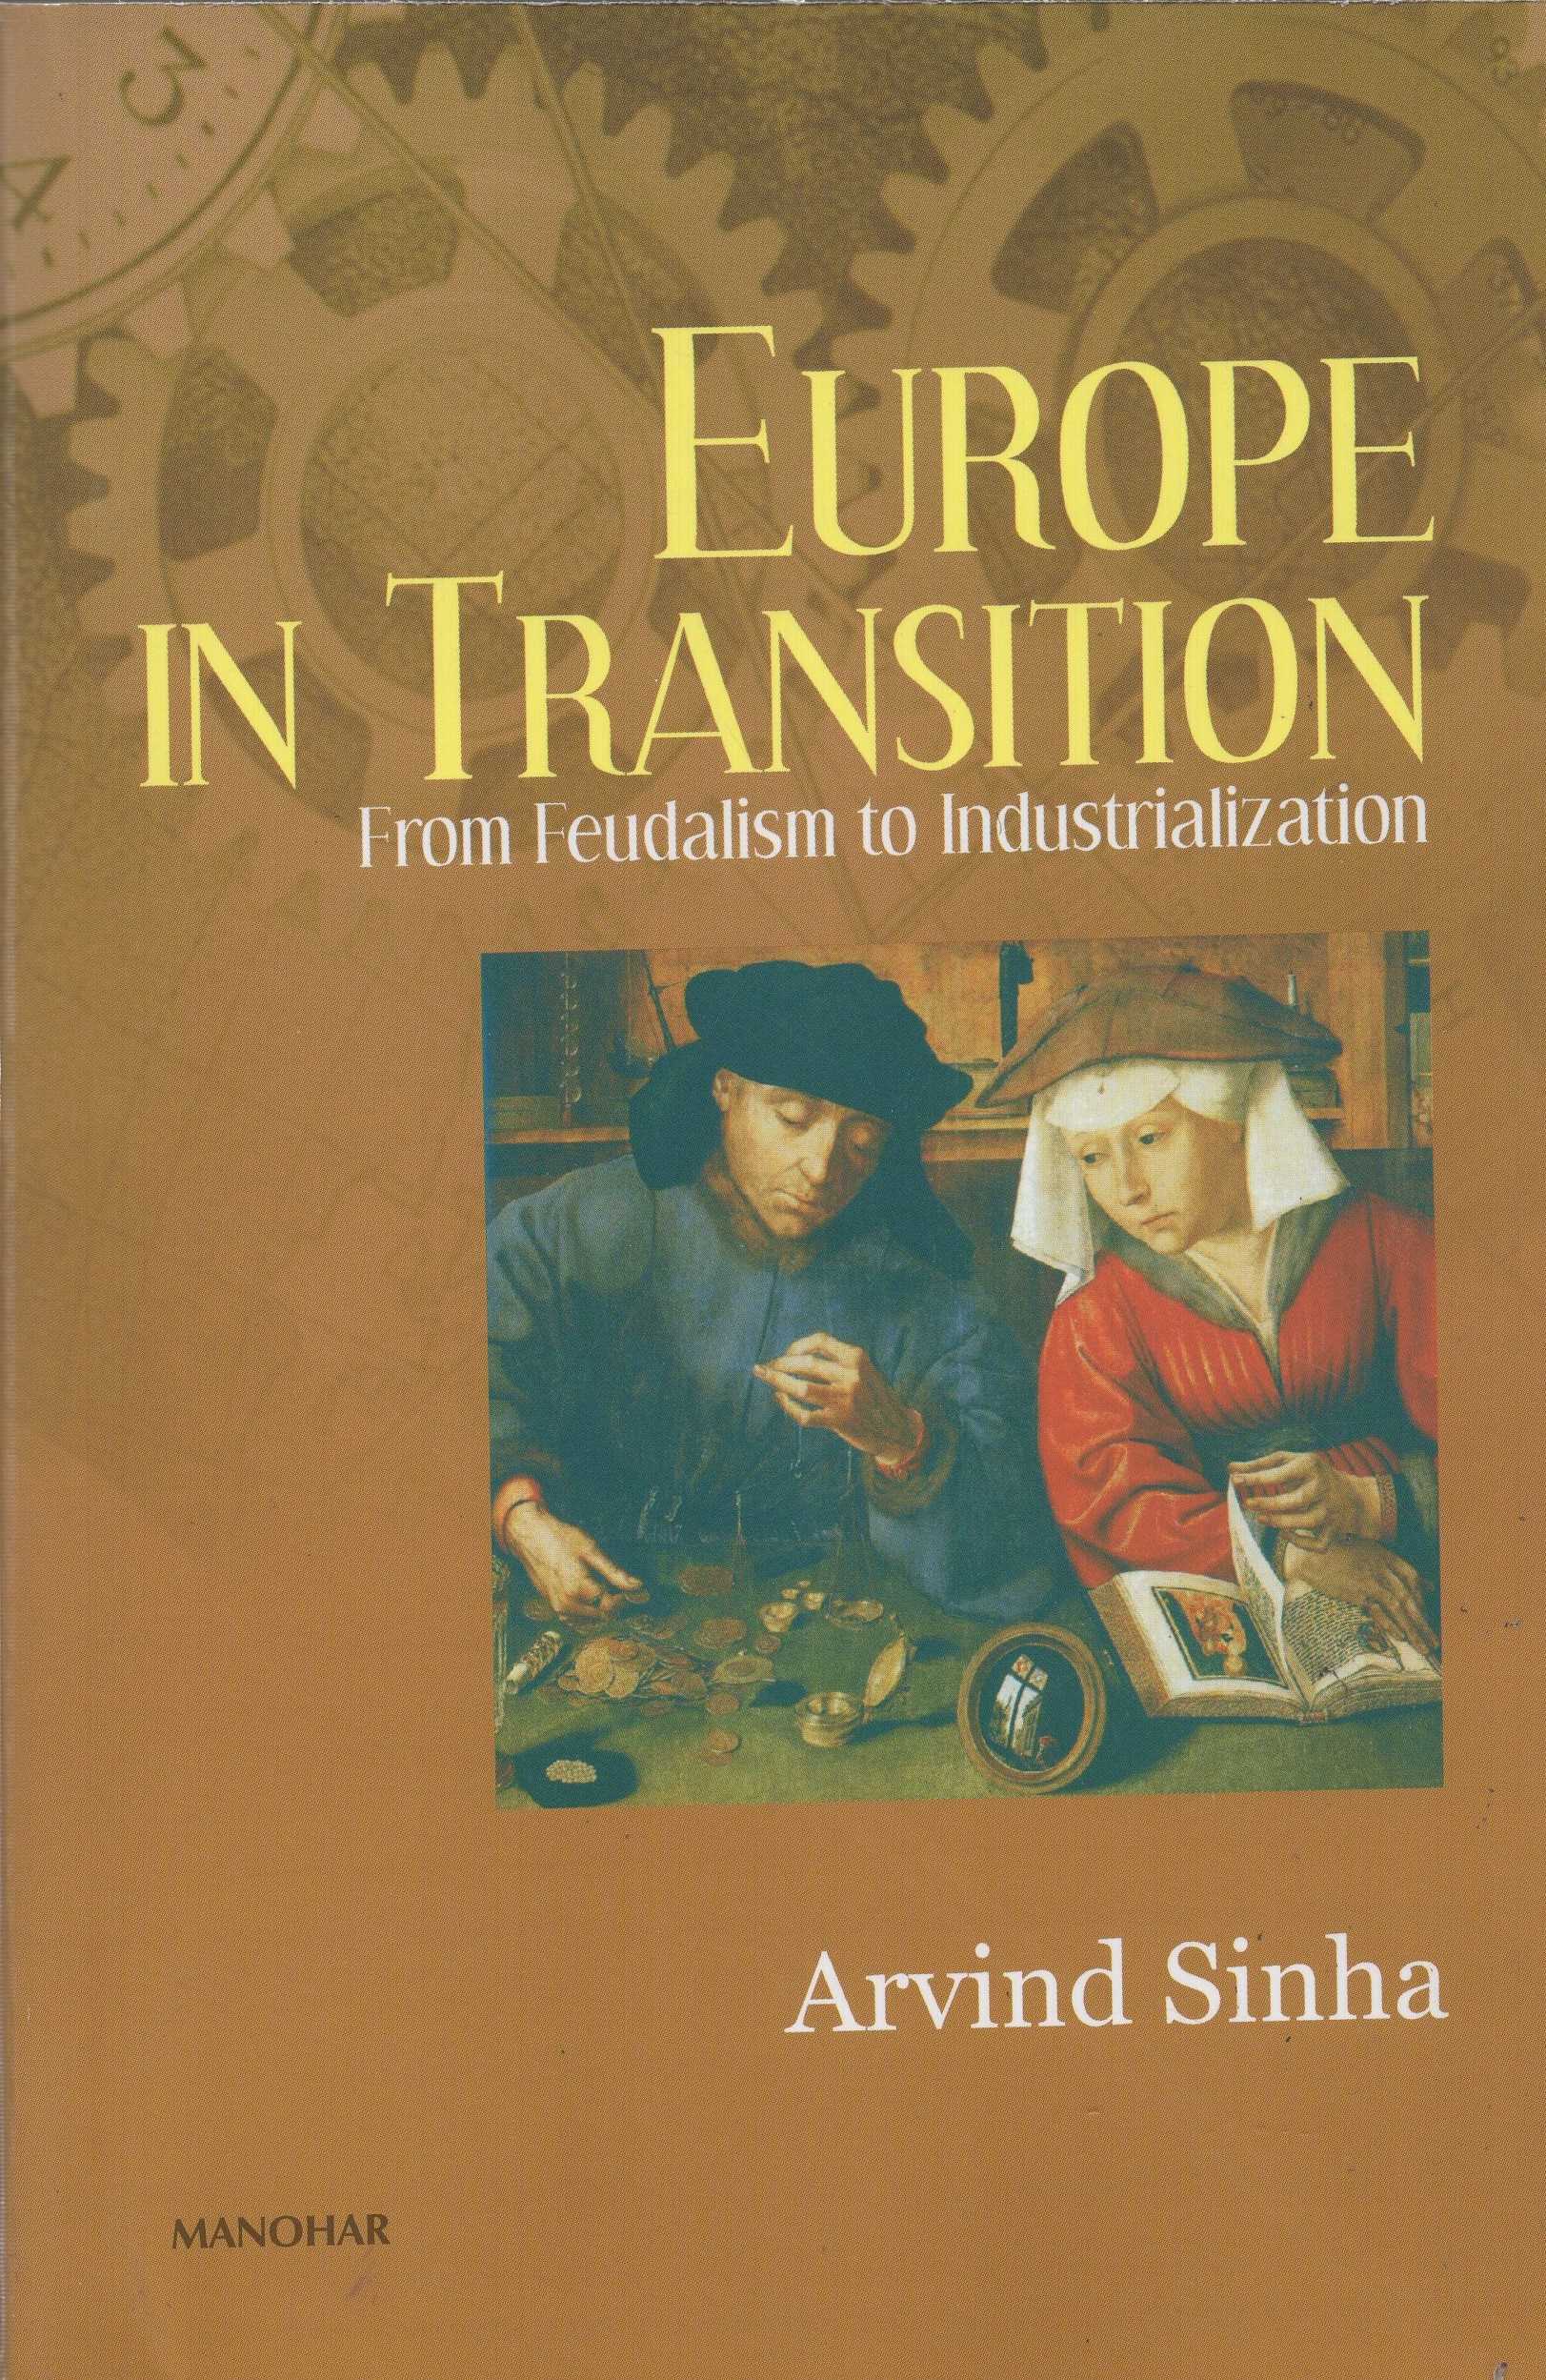 Europe in Transition: From Feudalism to Industrialization